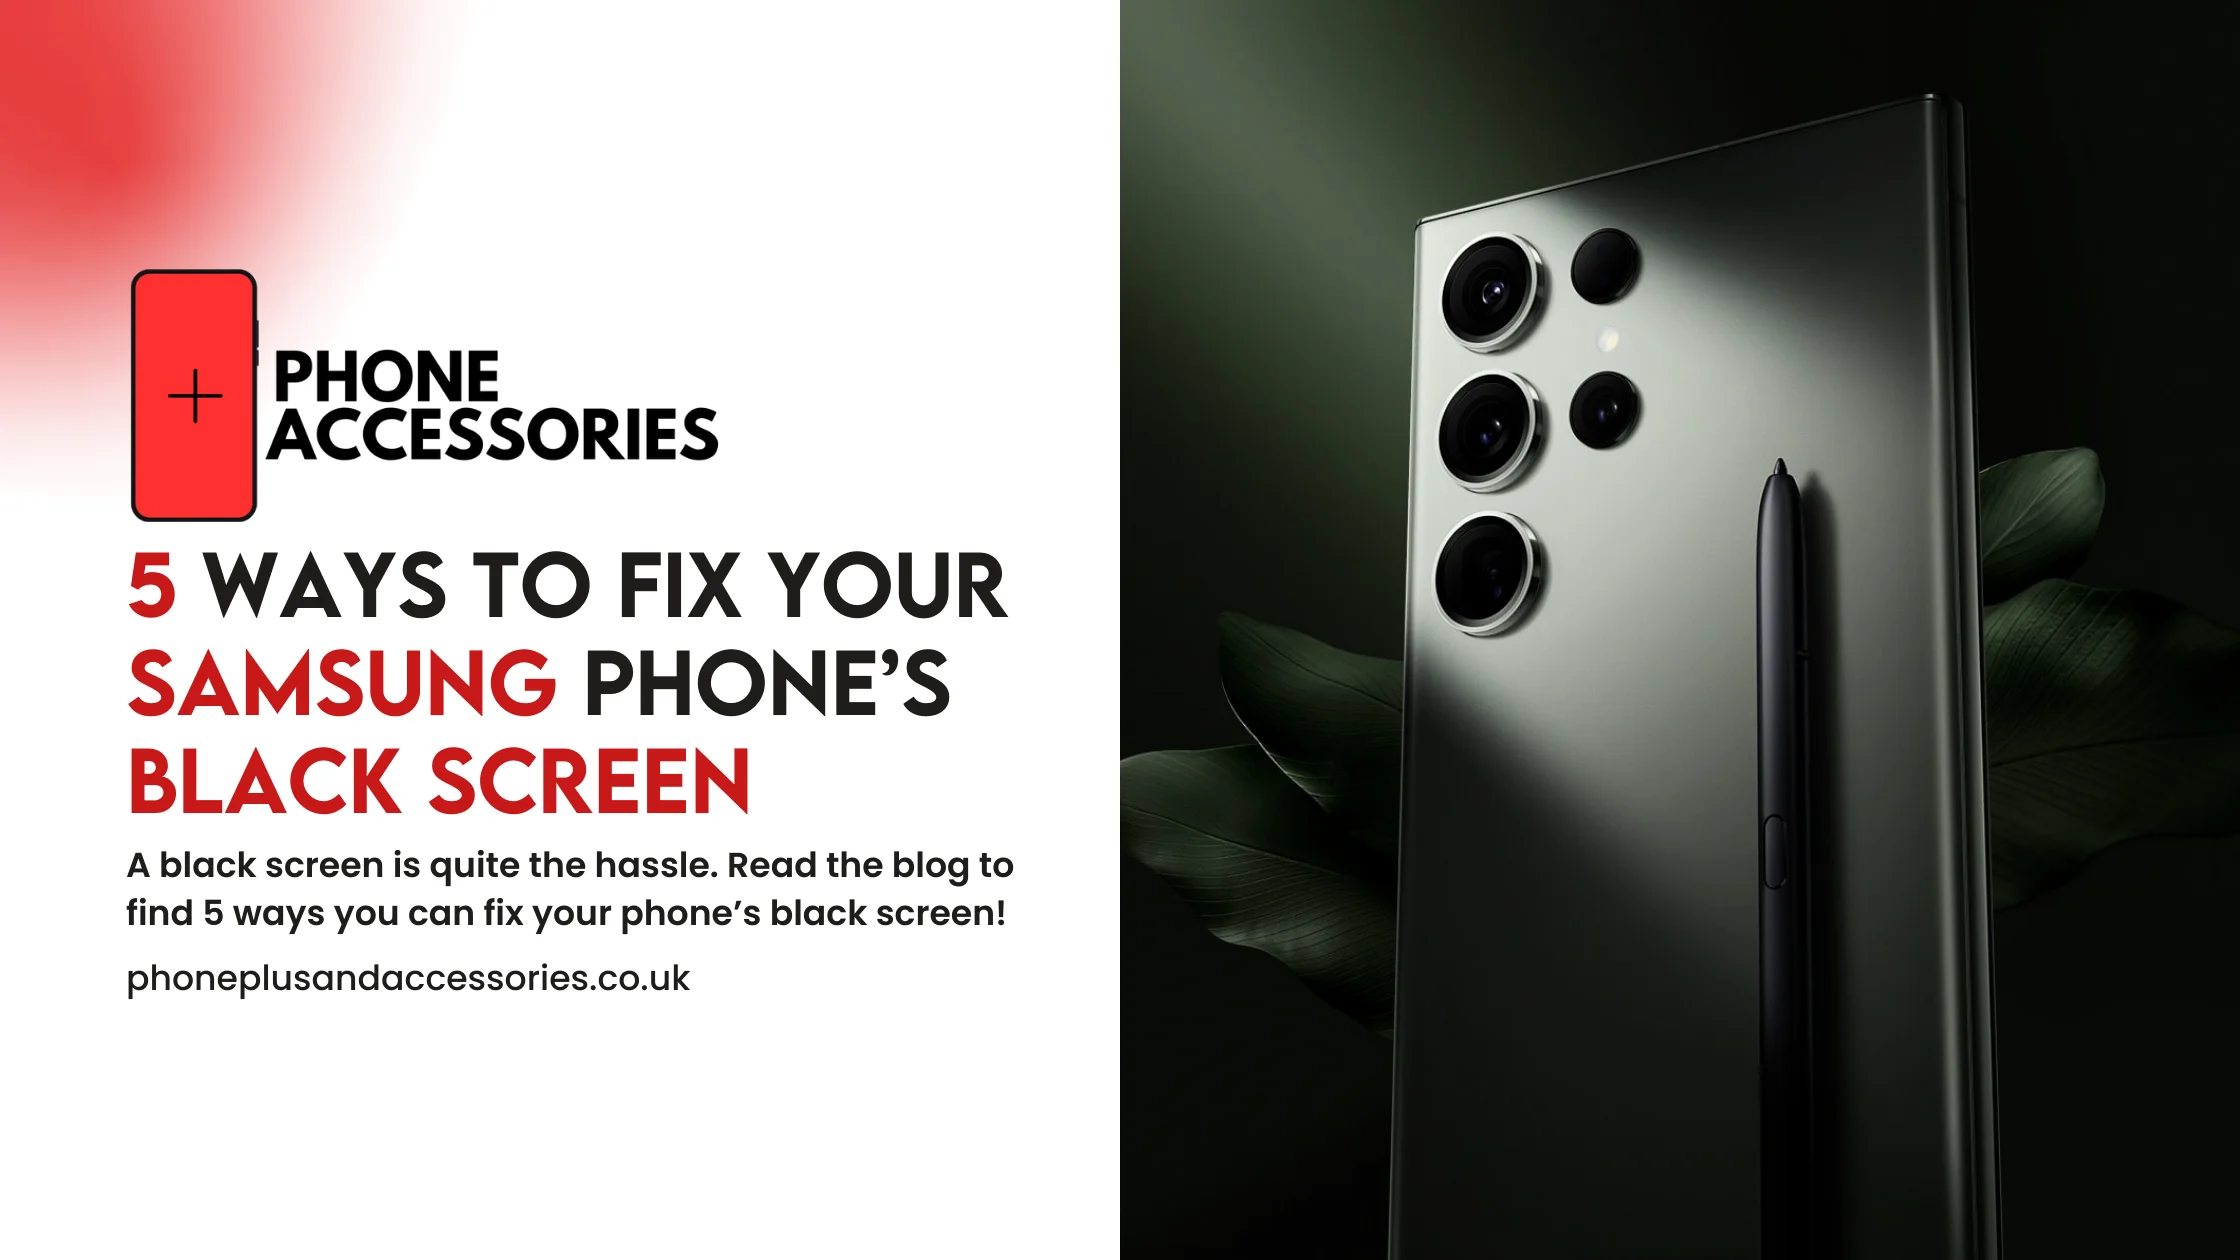 How to fix samsung's black screen